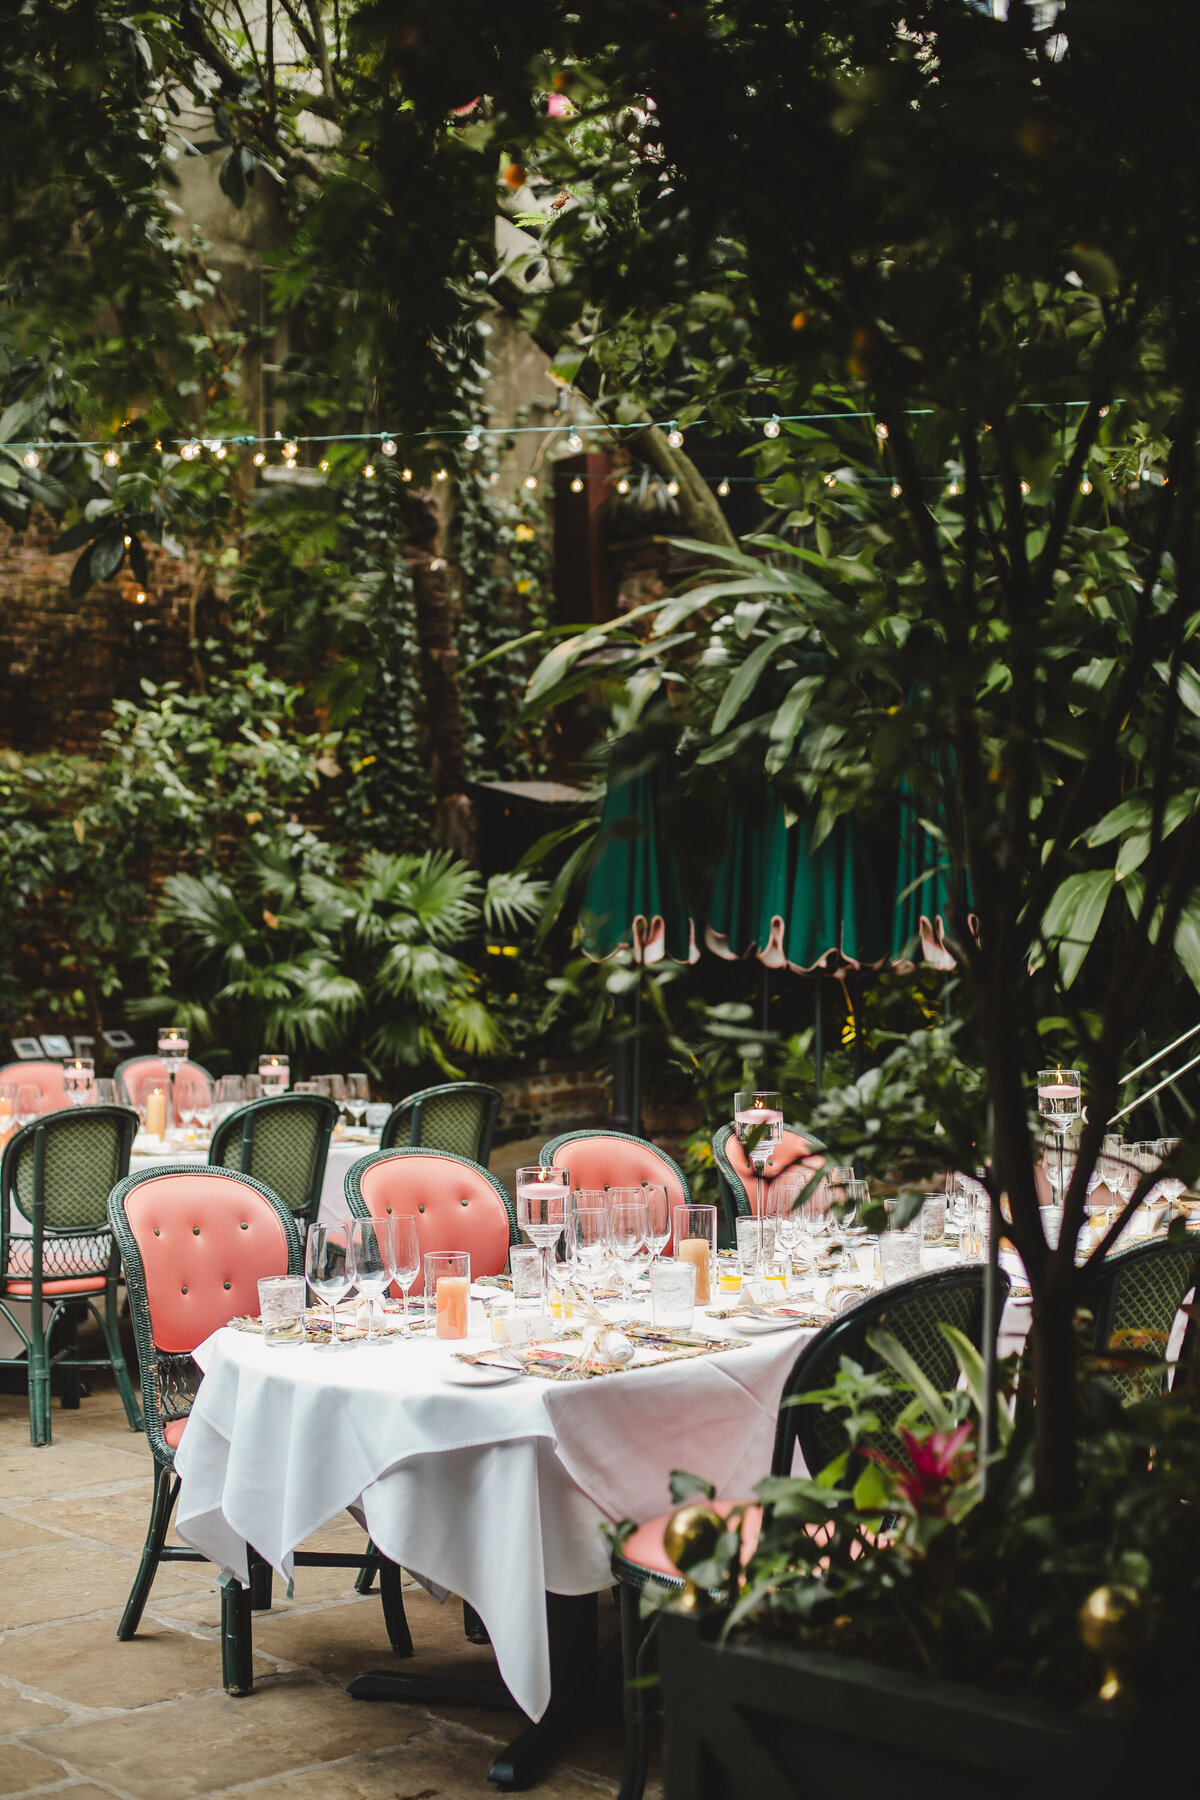 Sarah + George - Rehearsal Dinner Welcome Party at Brennen's New Orleans - Luxury Event Planner - Michelle Norwood Events16